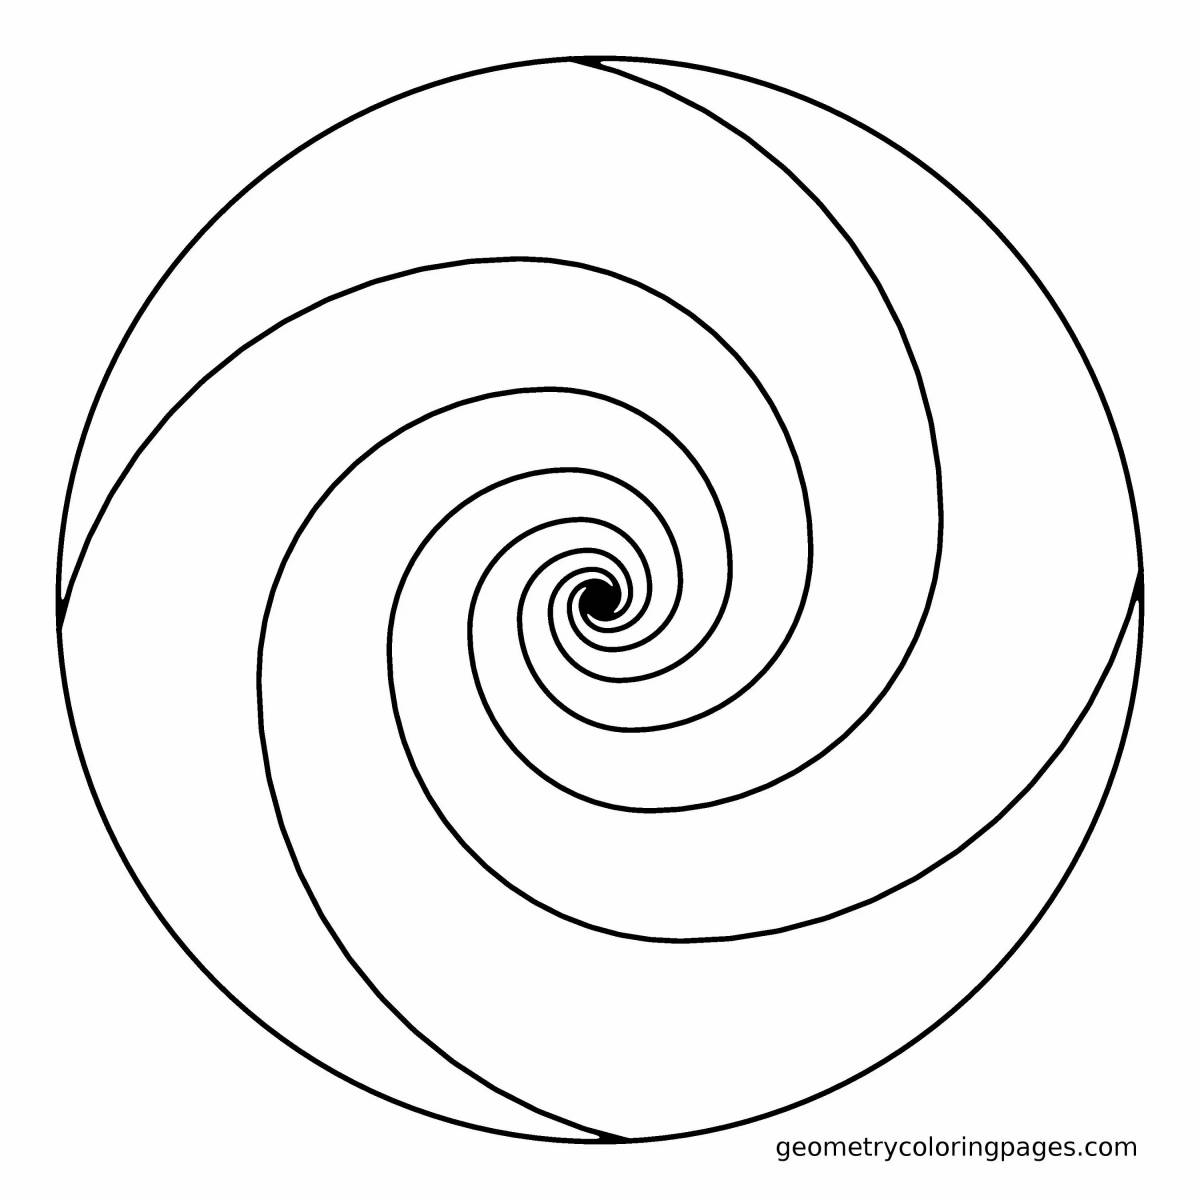 Fancy spiral coloring